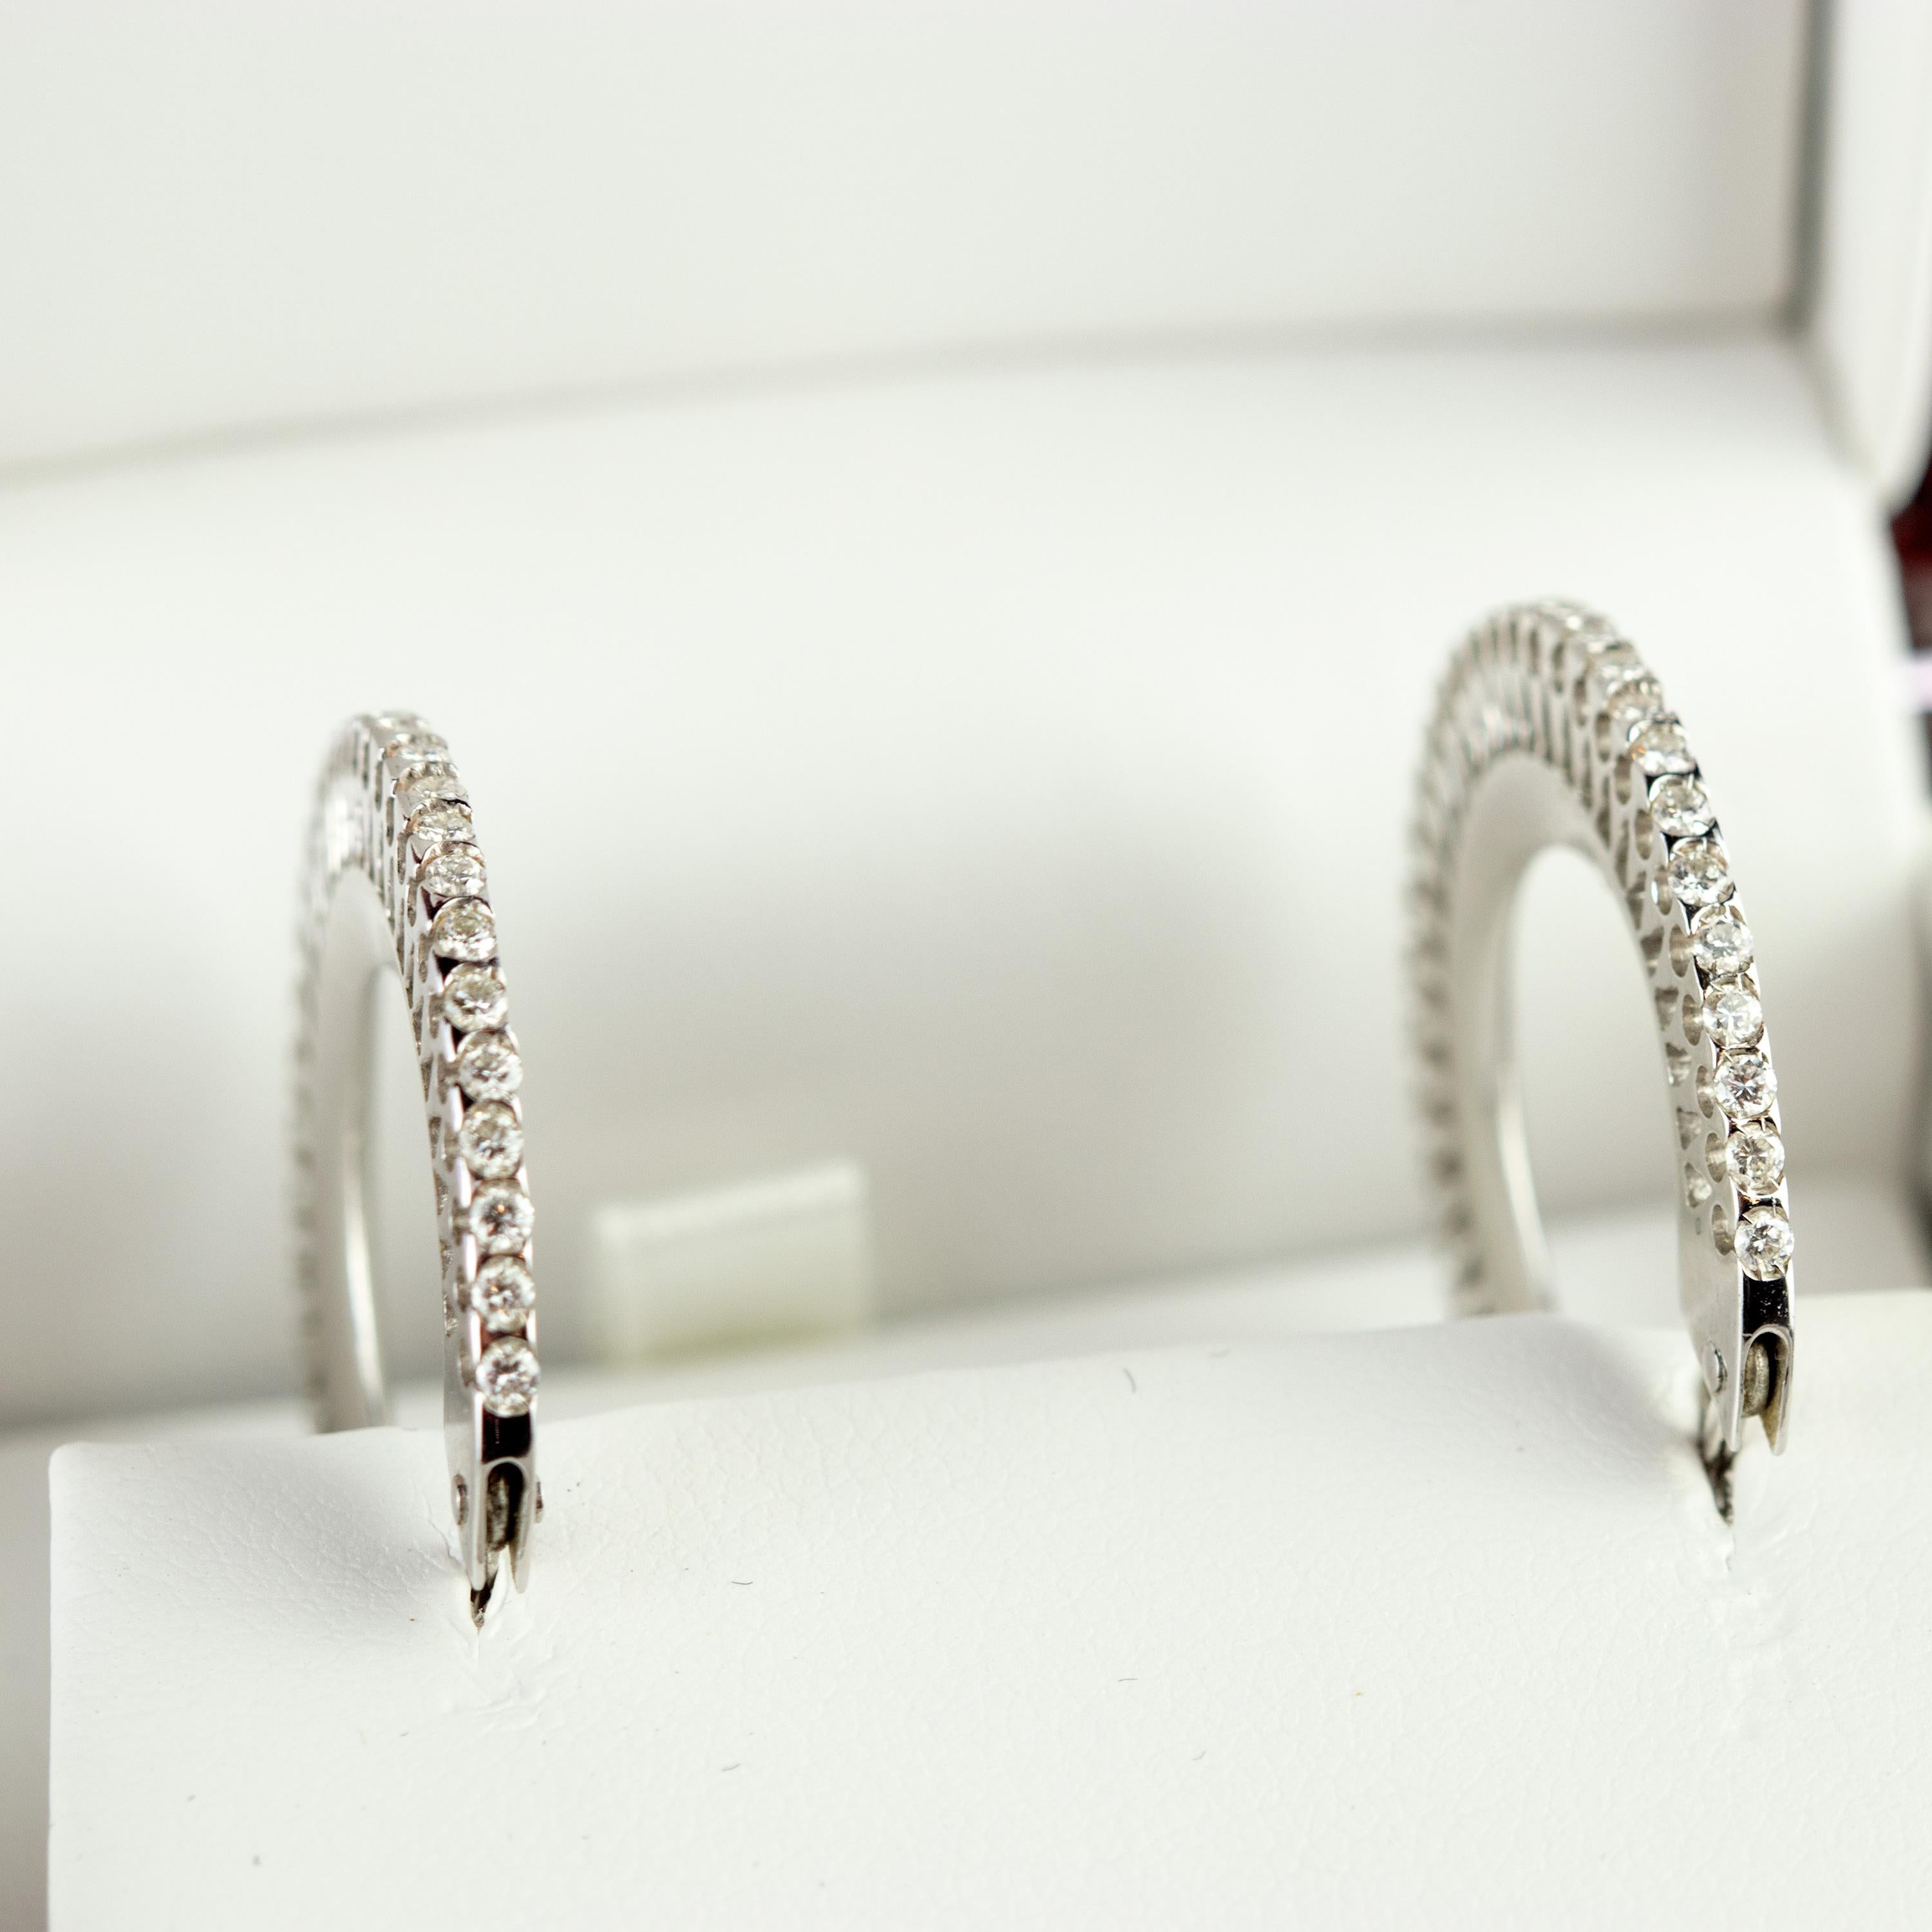 Enjoy the absolute beauty of this resplendent, classic and perfect pair of diamond hoops! These medium inside out diamond hoop earrings in 18 karat white gold brilliant diamond line. With 0.9 carat, these handmade precious gems will shine on any